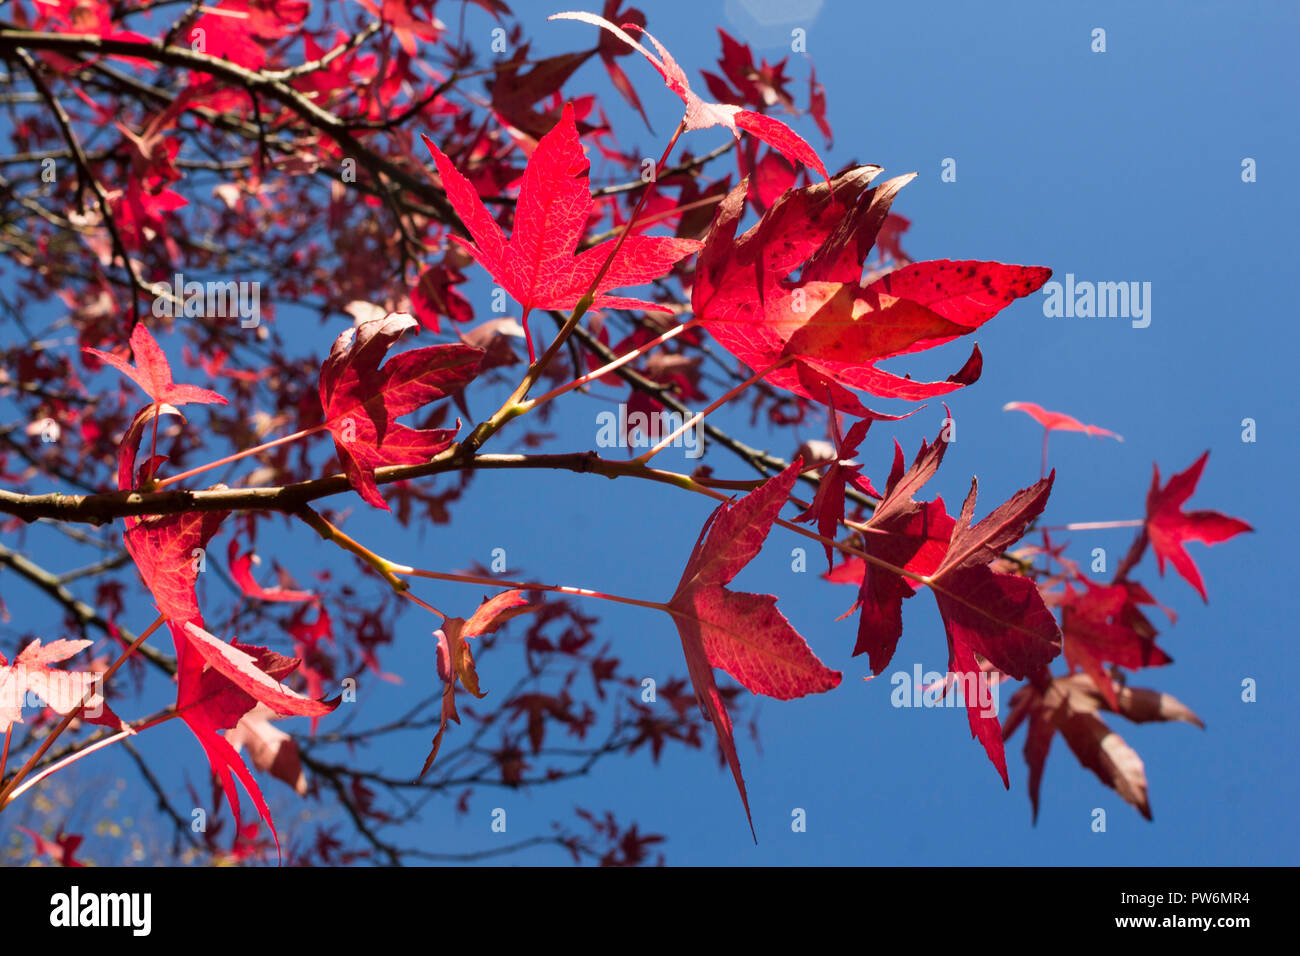 Leaves on a Japanese Maple tree in autumnal colours agianst a blue sky during October in Scotland Stock Photo